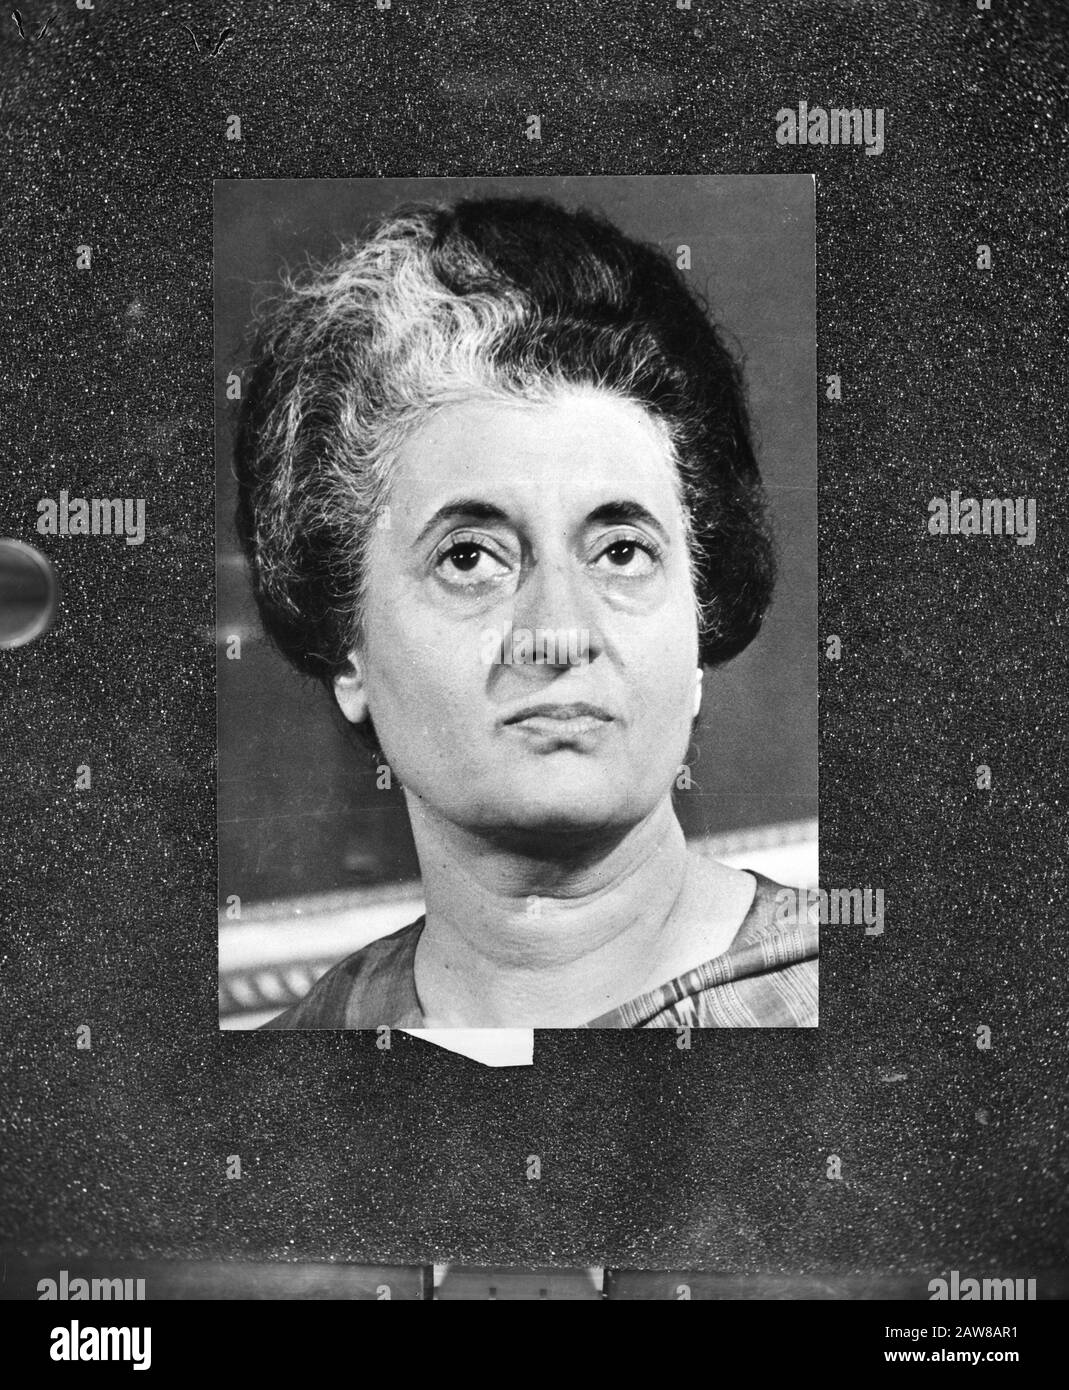 Elections in India  Prime Minister Indira Gandhi (Congress Party) Date: March 21, 1977 Location: India Keywords: Prime Ministers, politicians, portraits, elections Person Name: Gandhi, Indira Stock Photo